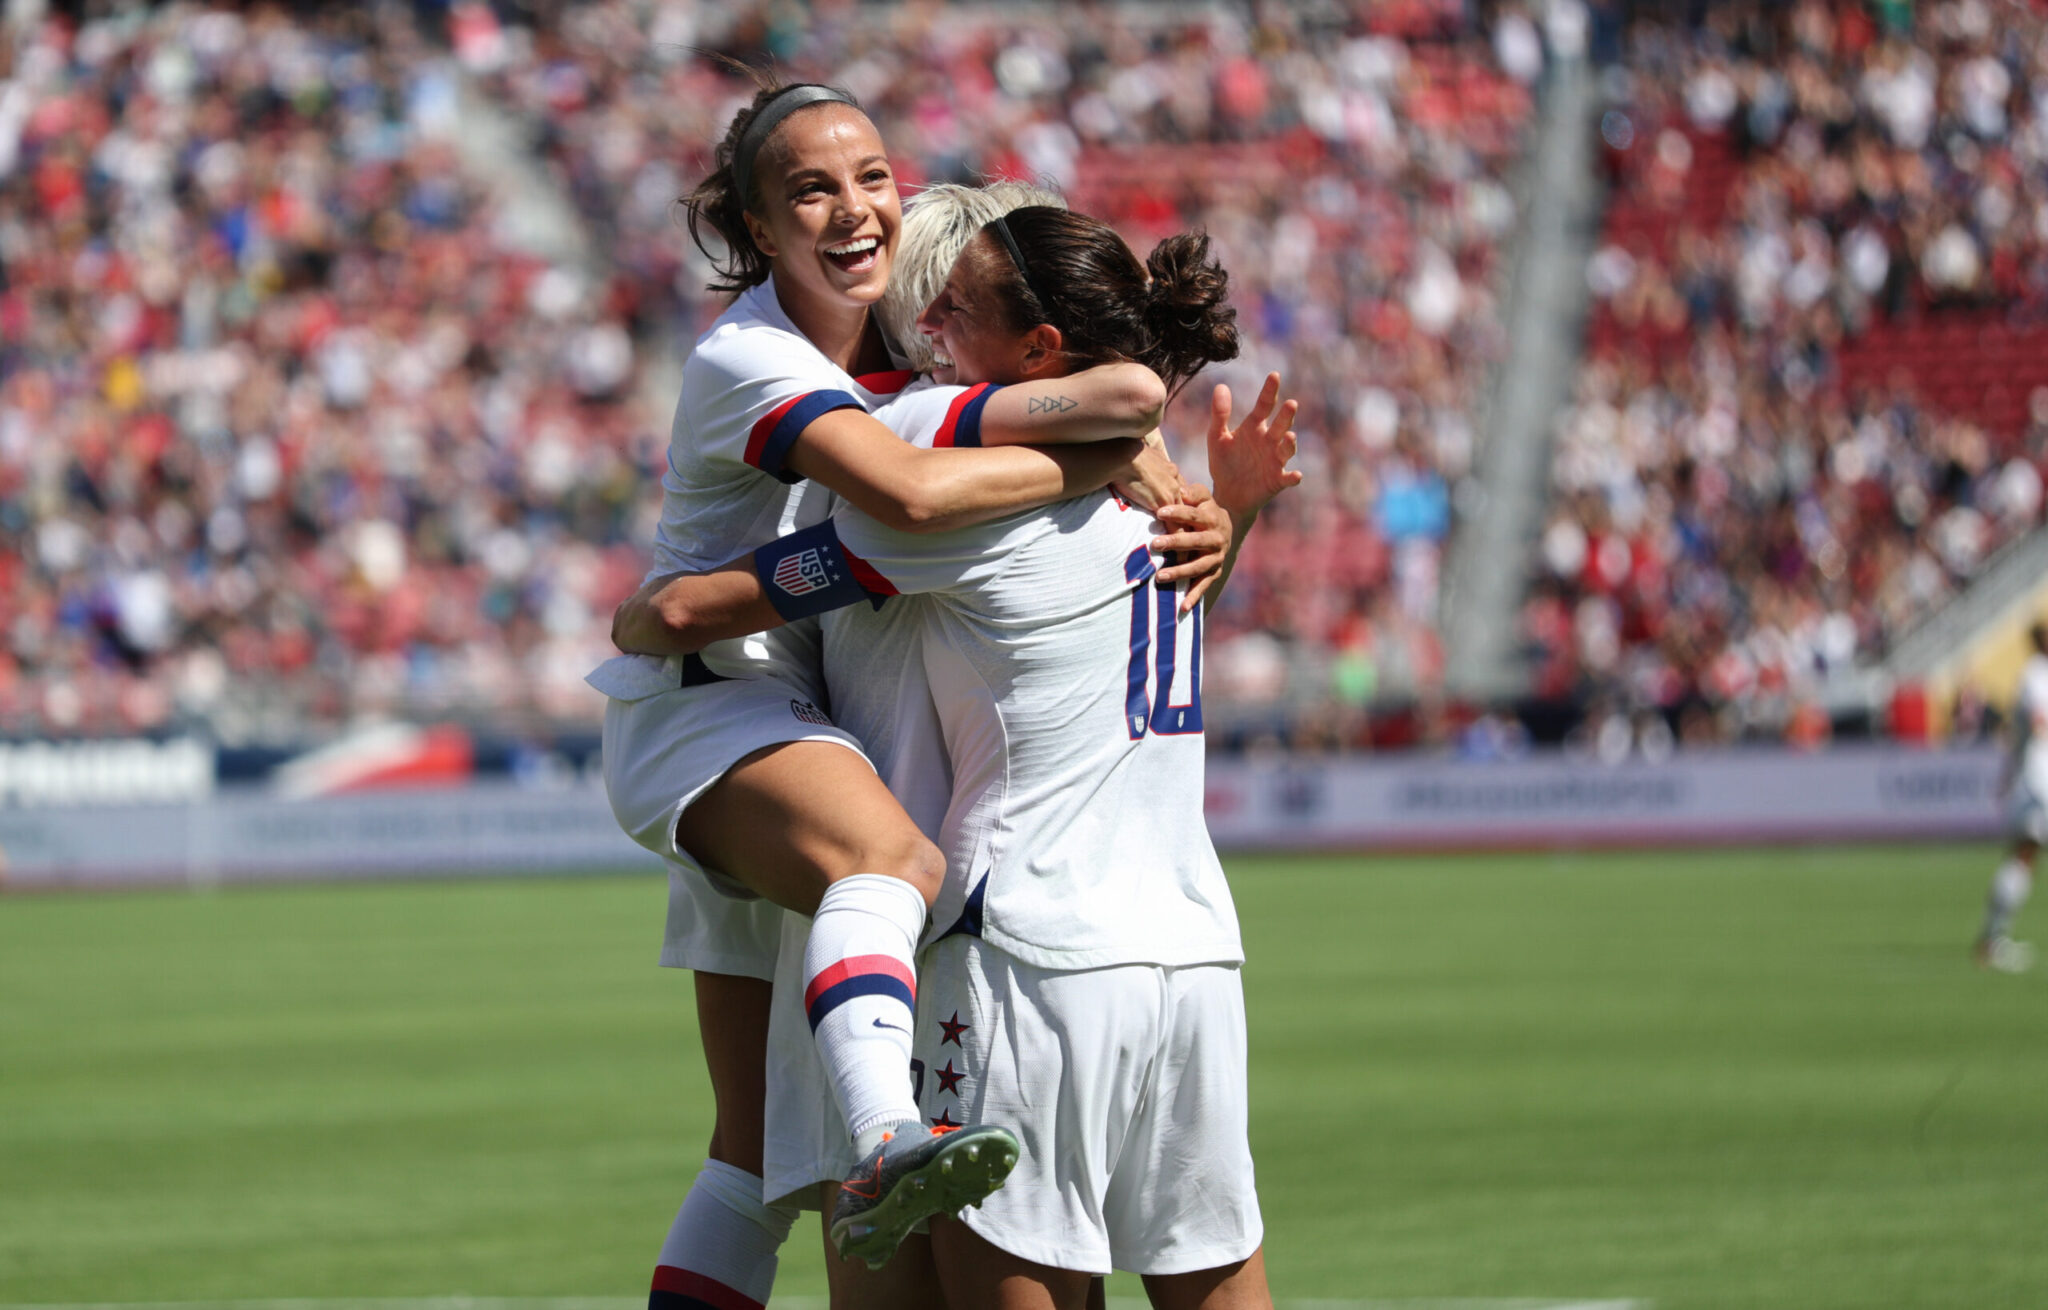 Lavelle, Pugh tally assists in U.S. “Send-off Series” victory over South Africa Featured Image